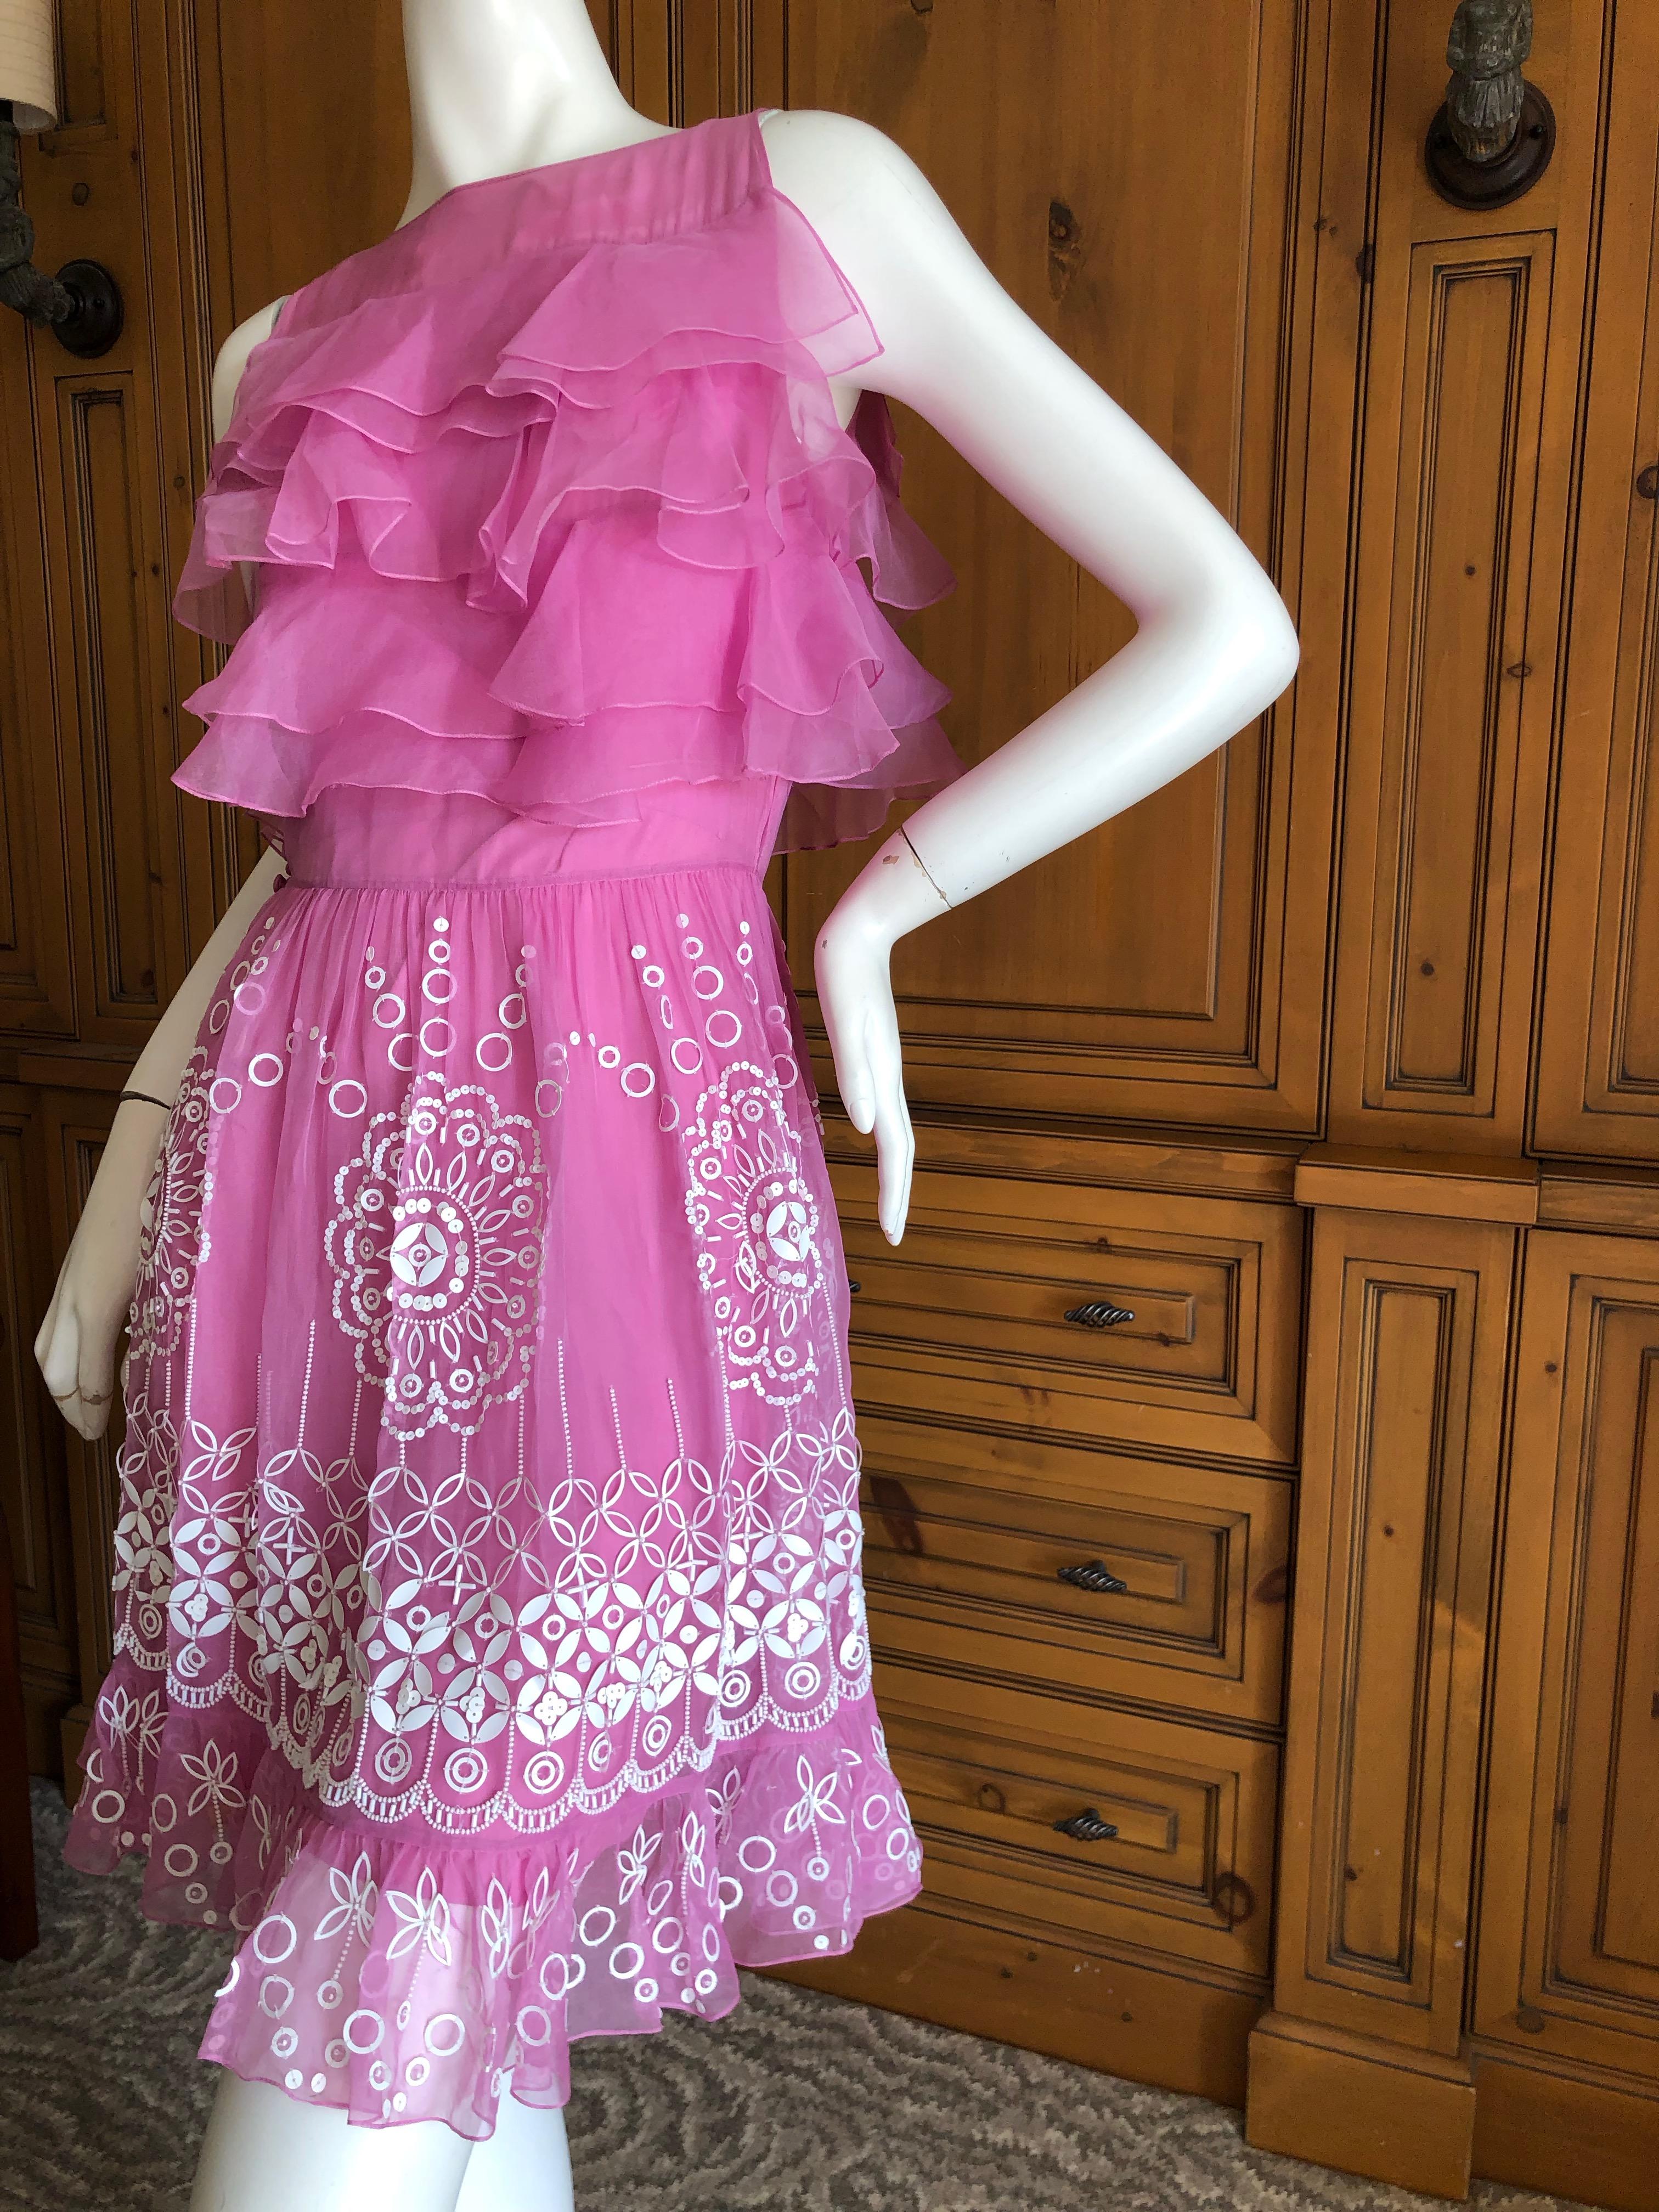 Christian Dior by John Galliano Pink Silk Dress with White Embellishments For Sale 4